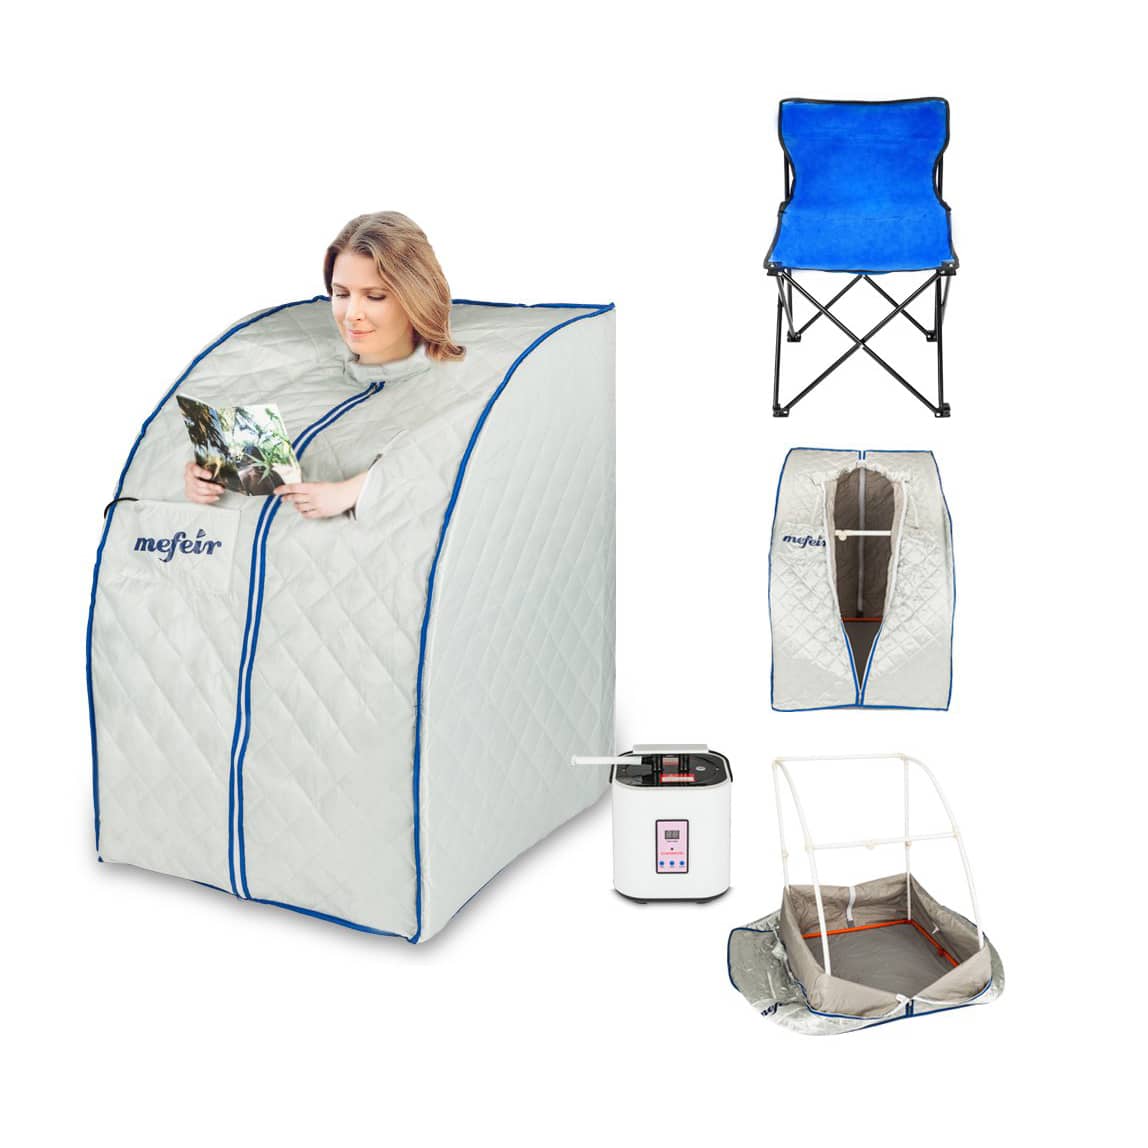 Top 10 Best Portable Home Saunas in 2021 Reviews Guide